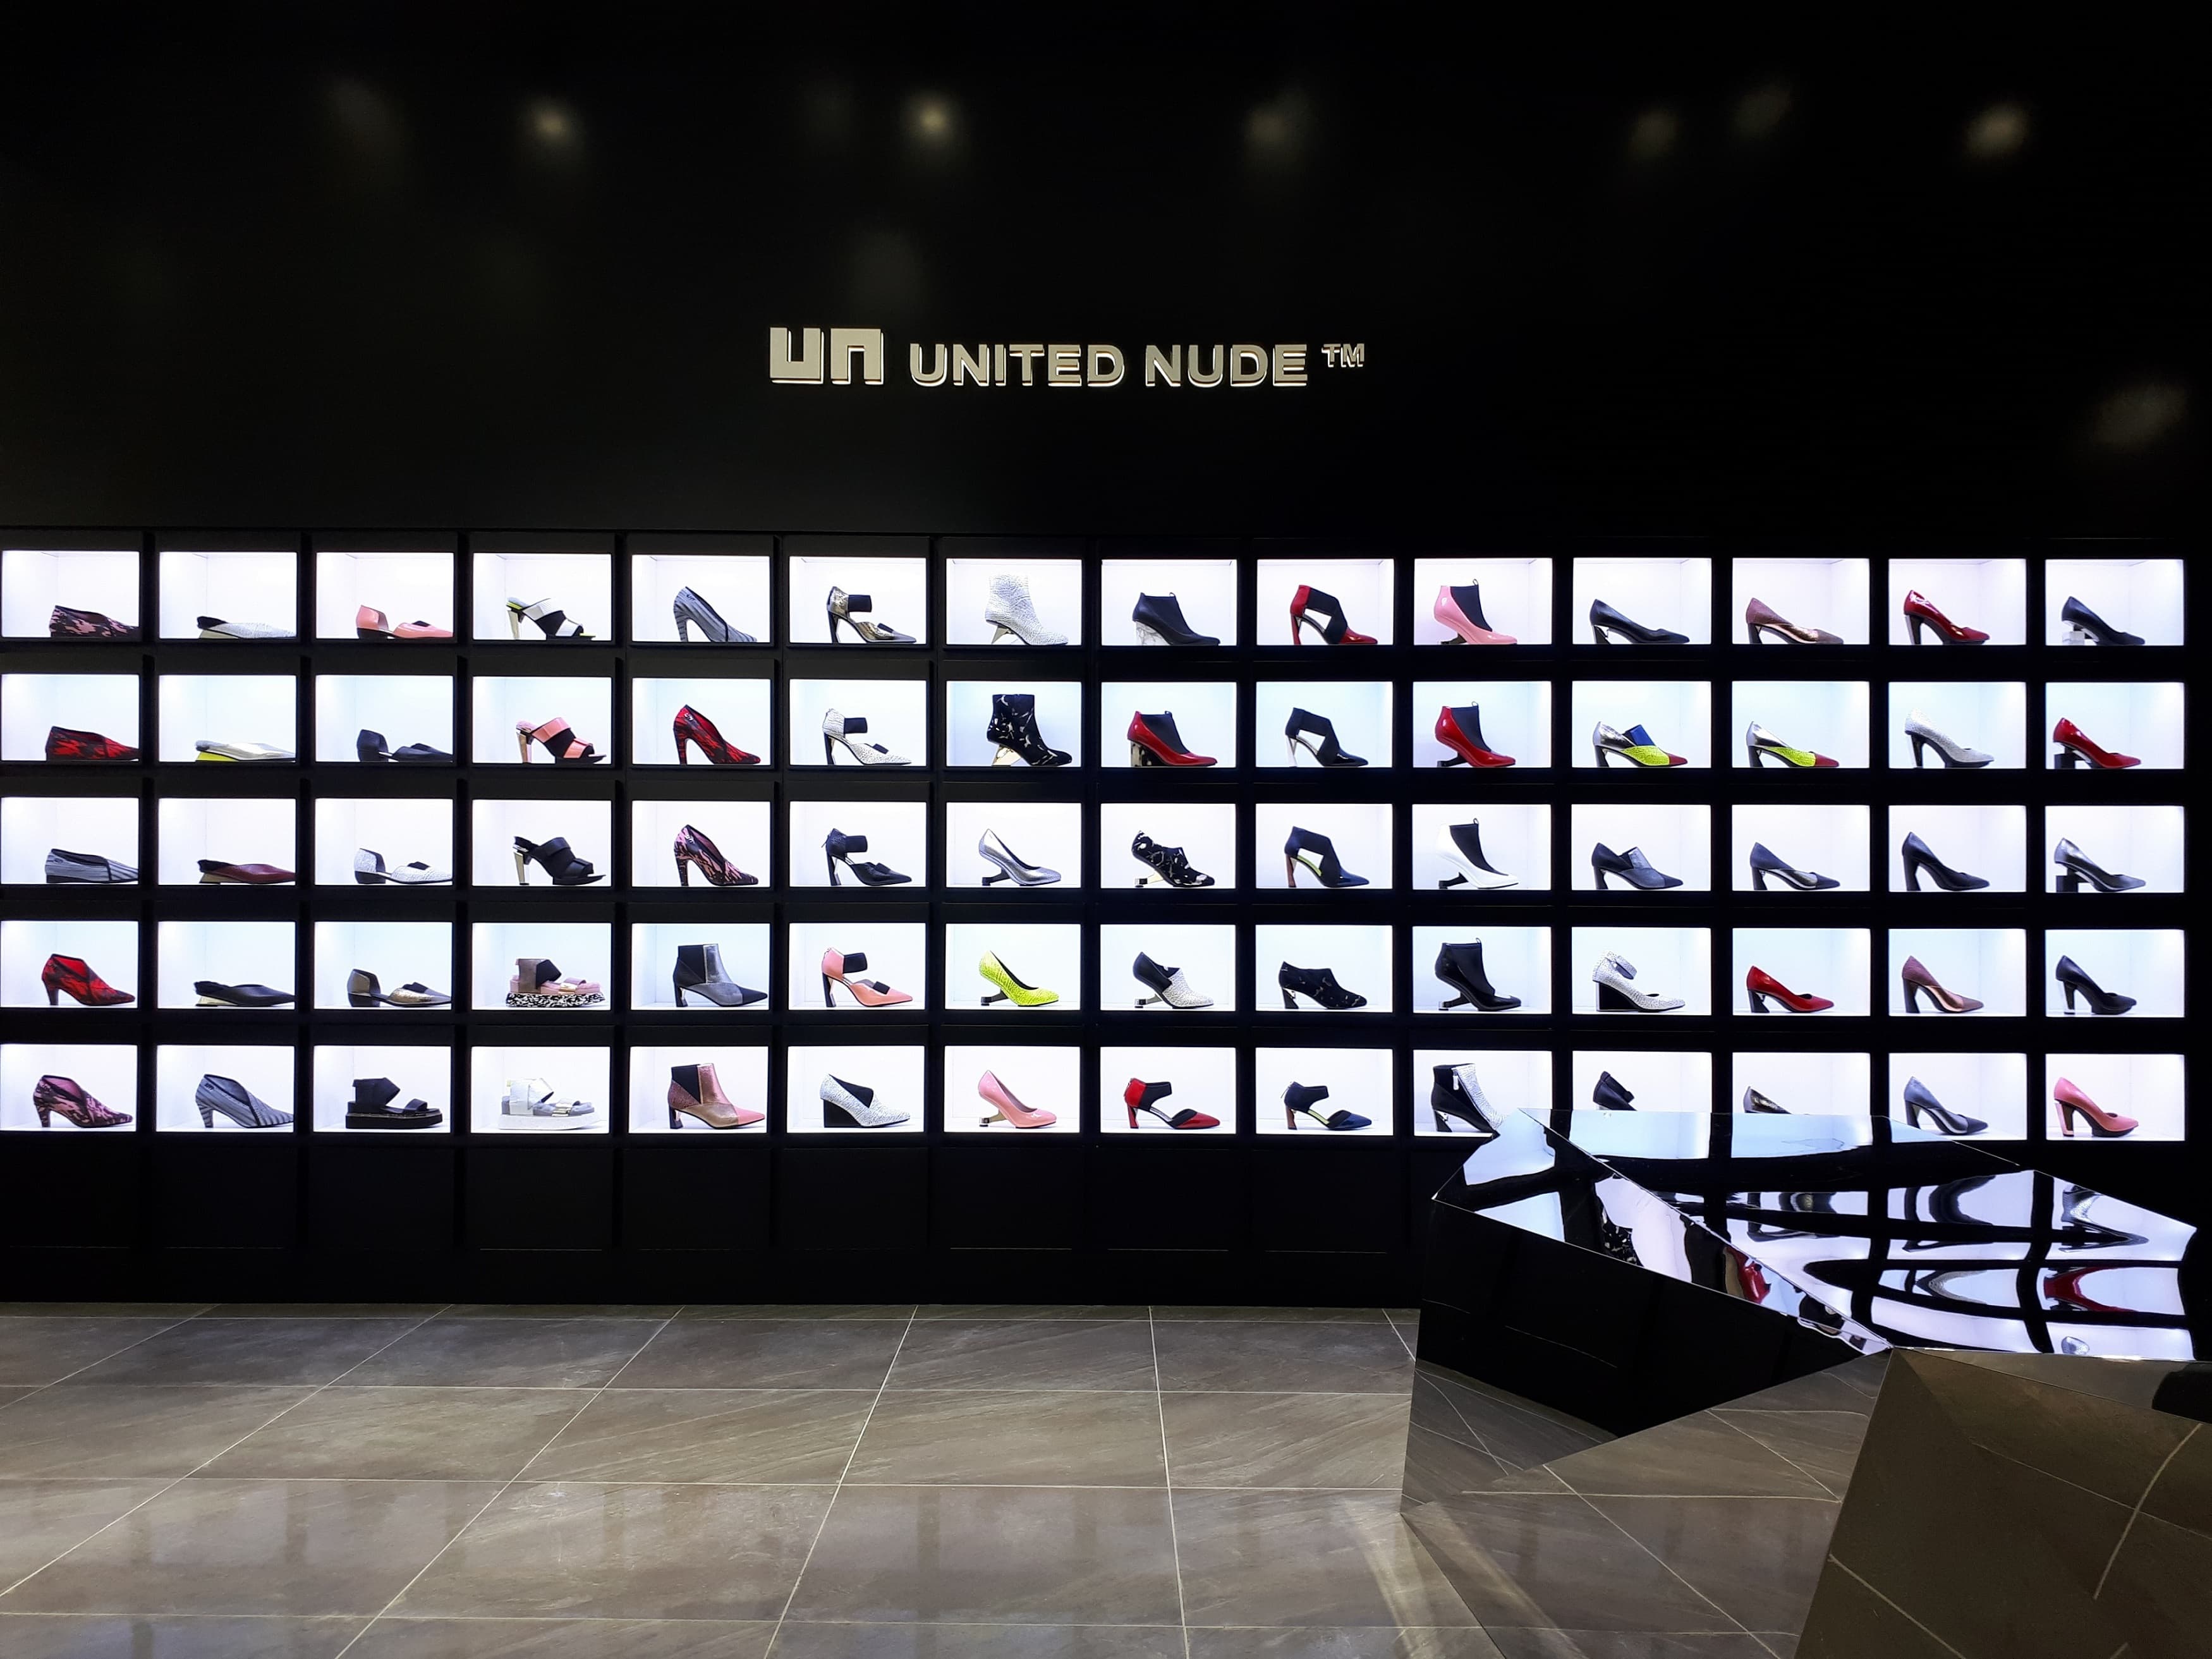 Q&A: United Nude’s Founder, Rem D Koolhaas on striking a balance between aesthetics and comfort